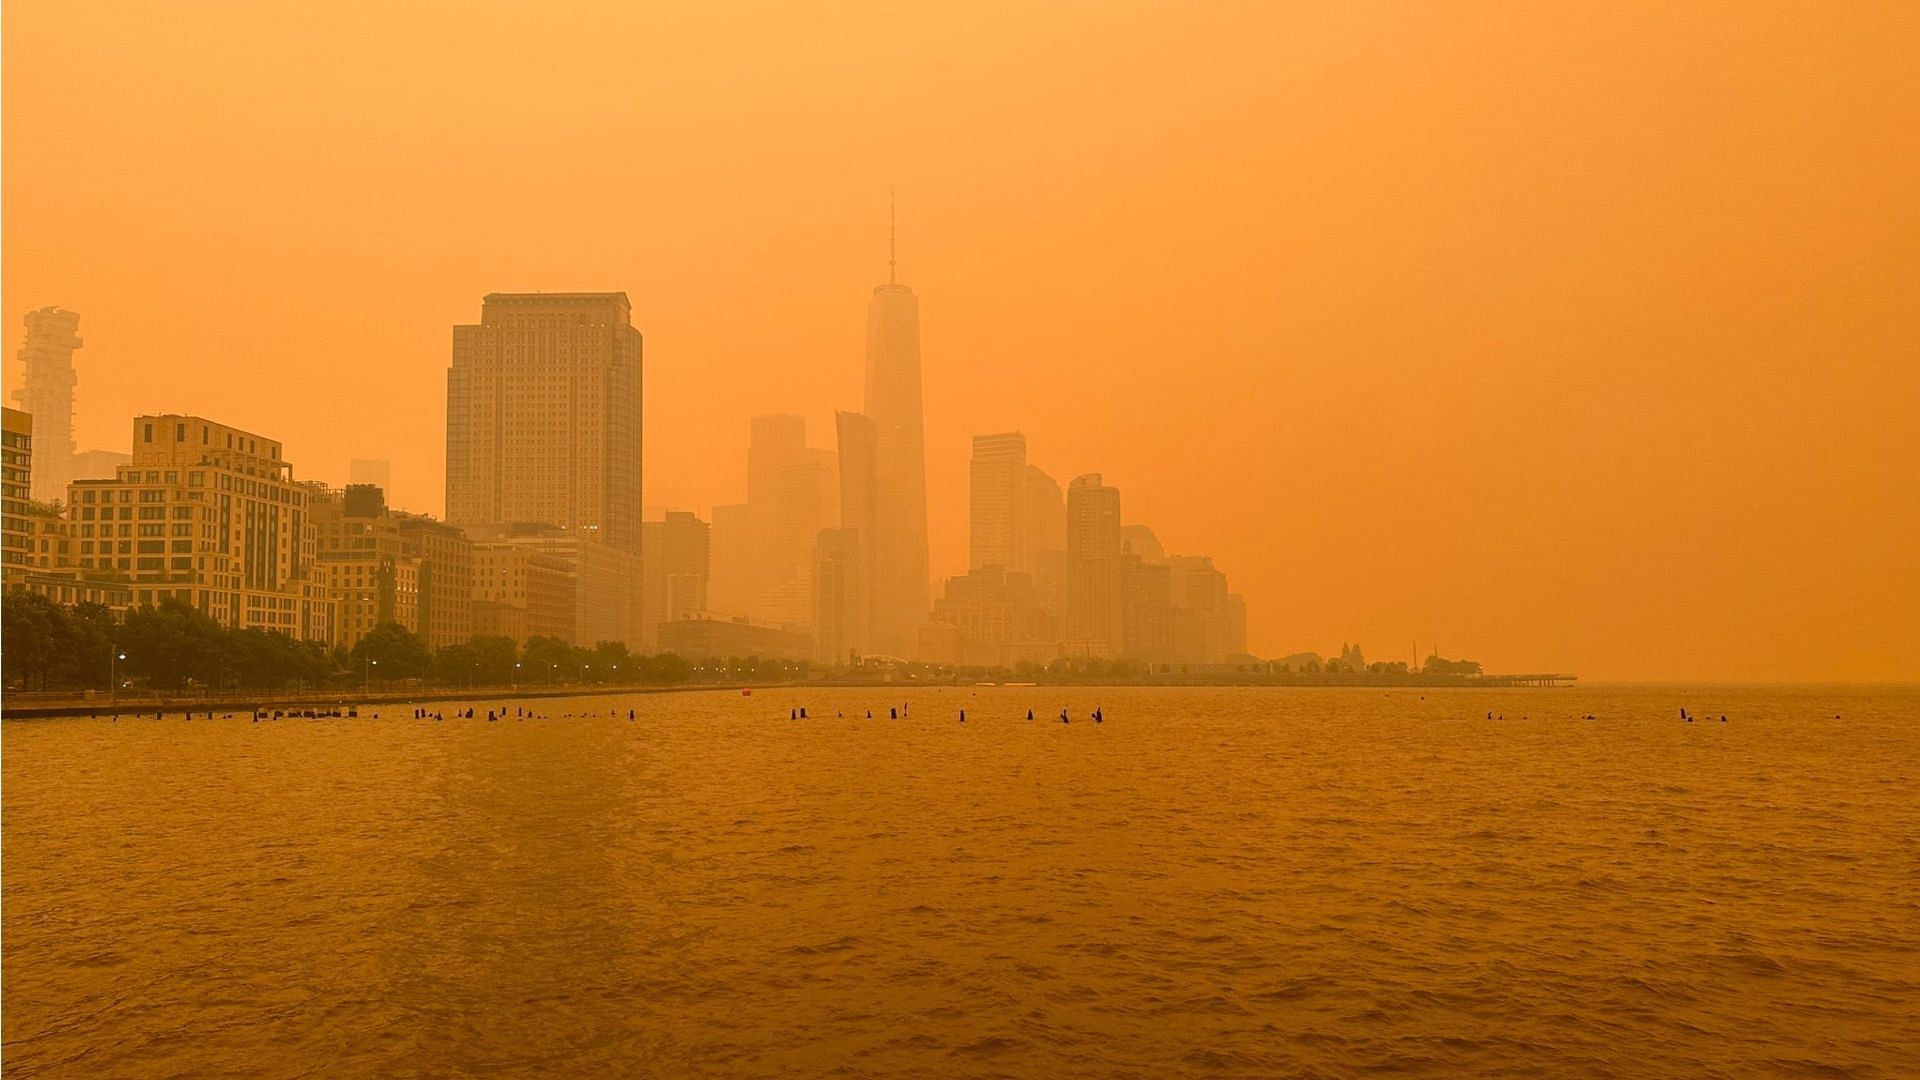 New York City due to wildfire in Canada. (Photo via @aplasticplant/Twitter)